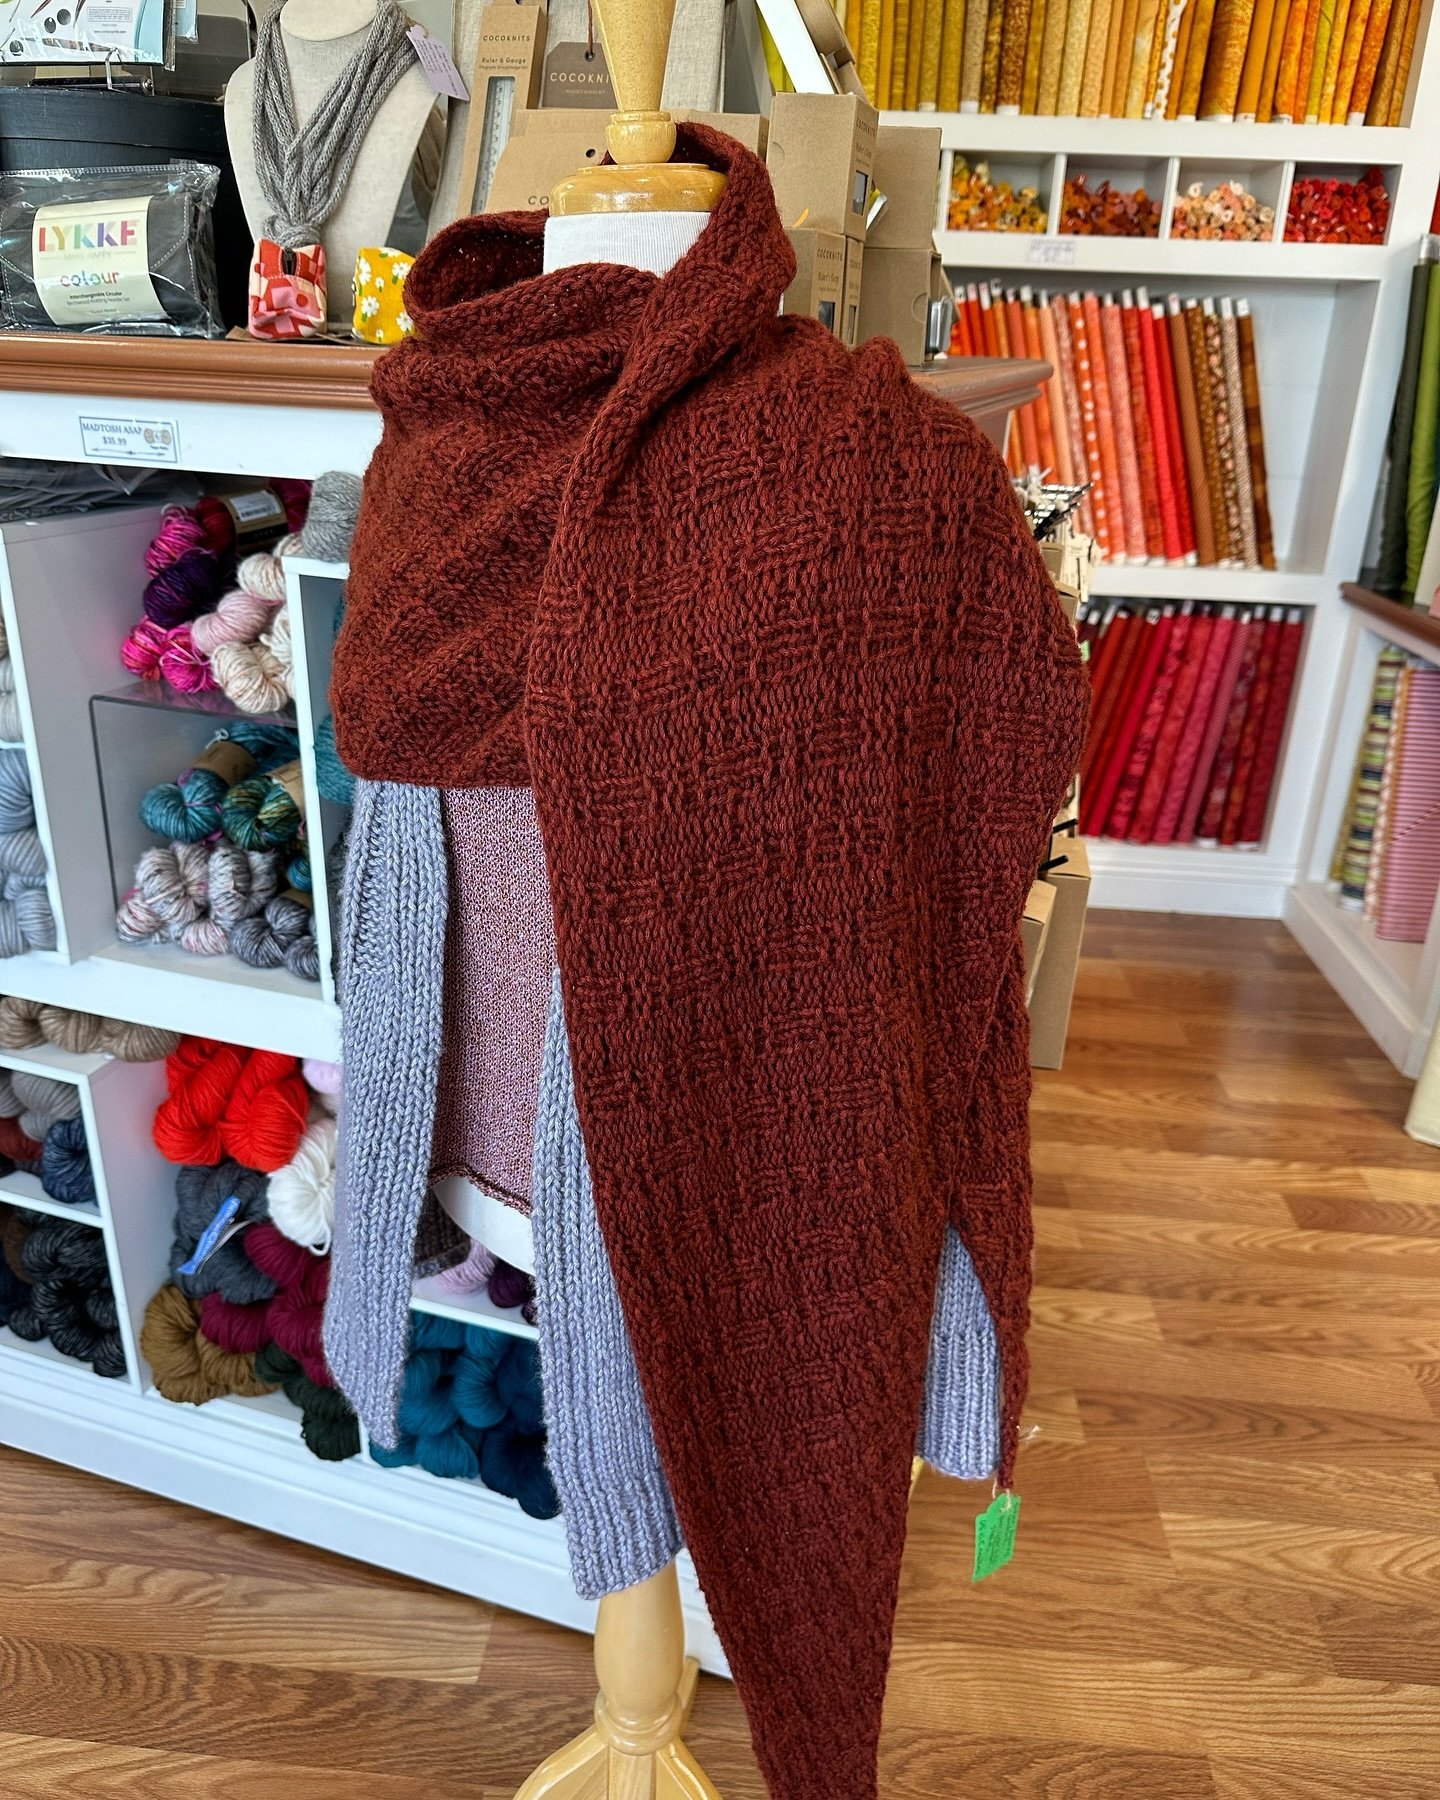 I know it&rsquo;s getting close to summer but I am loving this rust color of @woolfolk_yarn Luft. This is the Agner shawl. Cozy and light as can be for a bulky weight yarn. Time to start knitting for those cool fall nights 😊